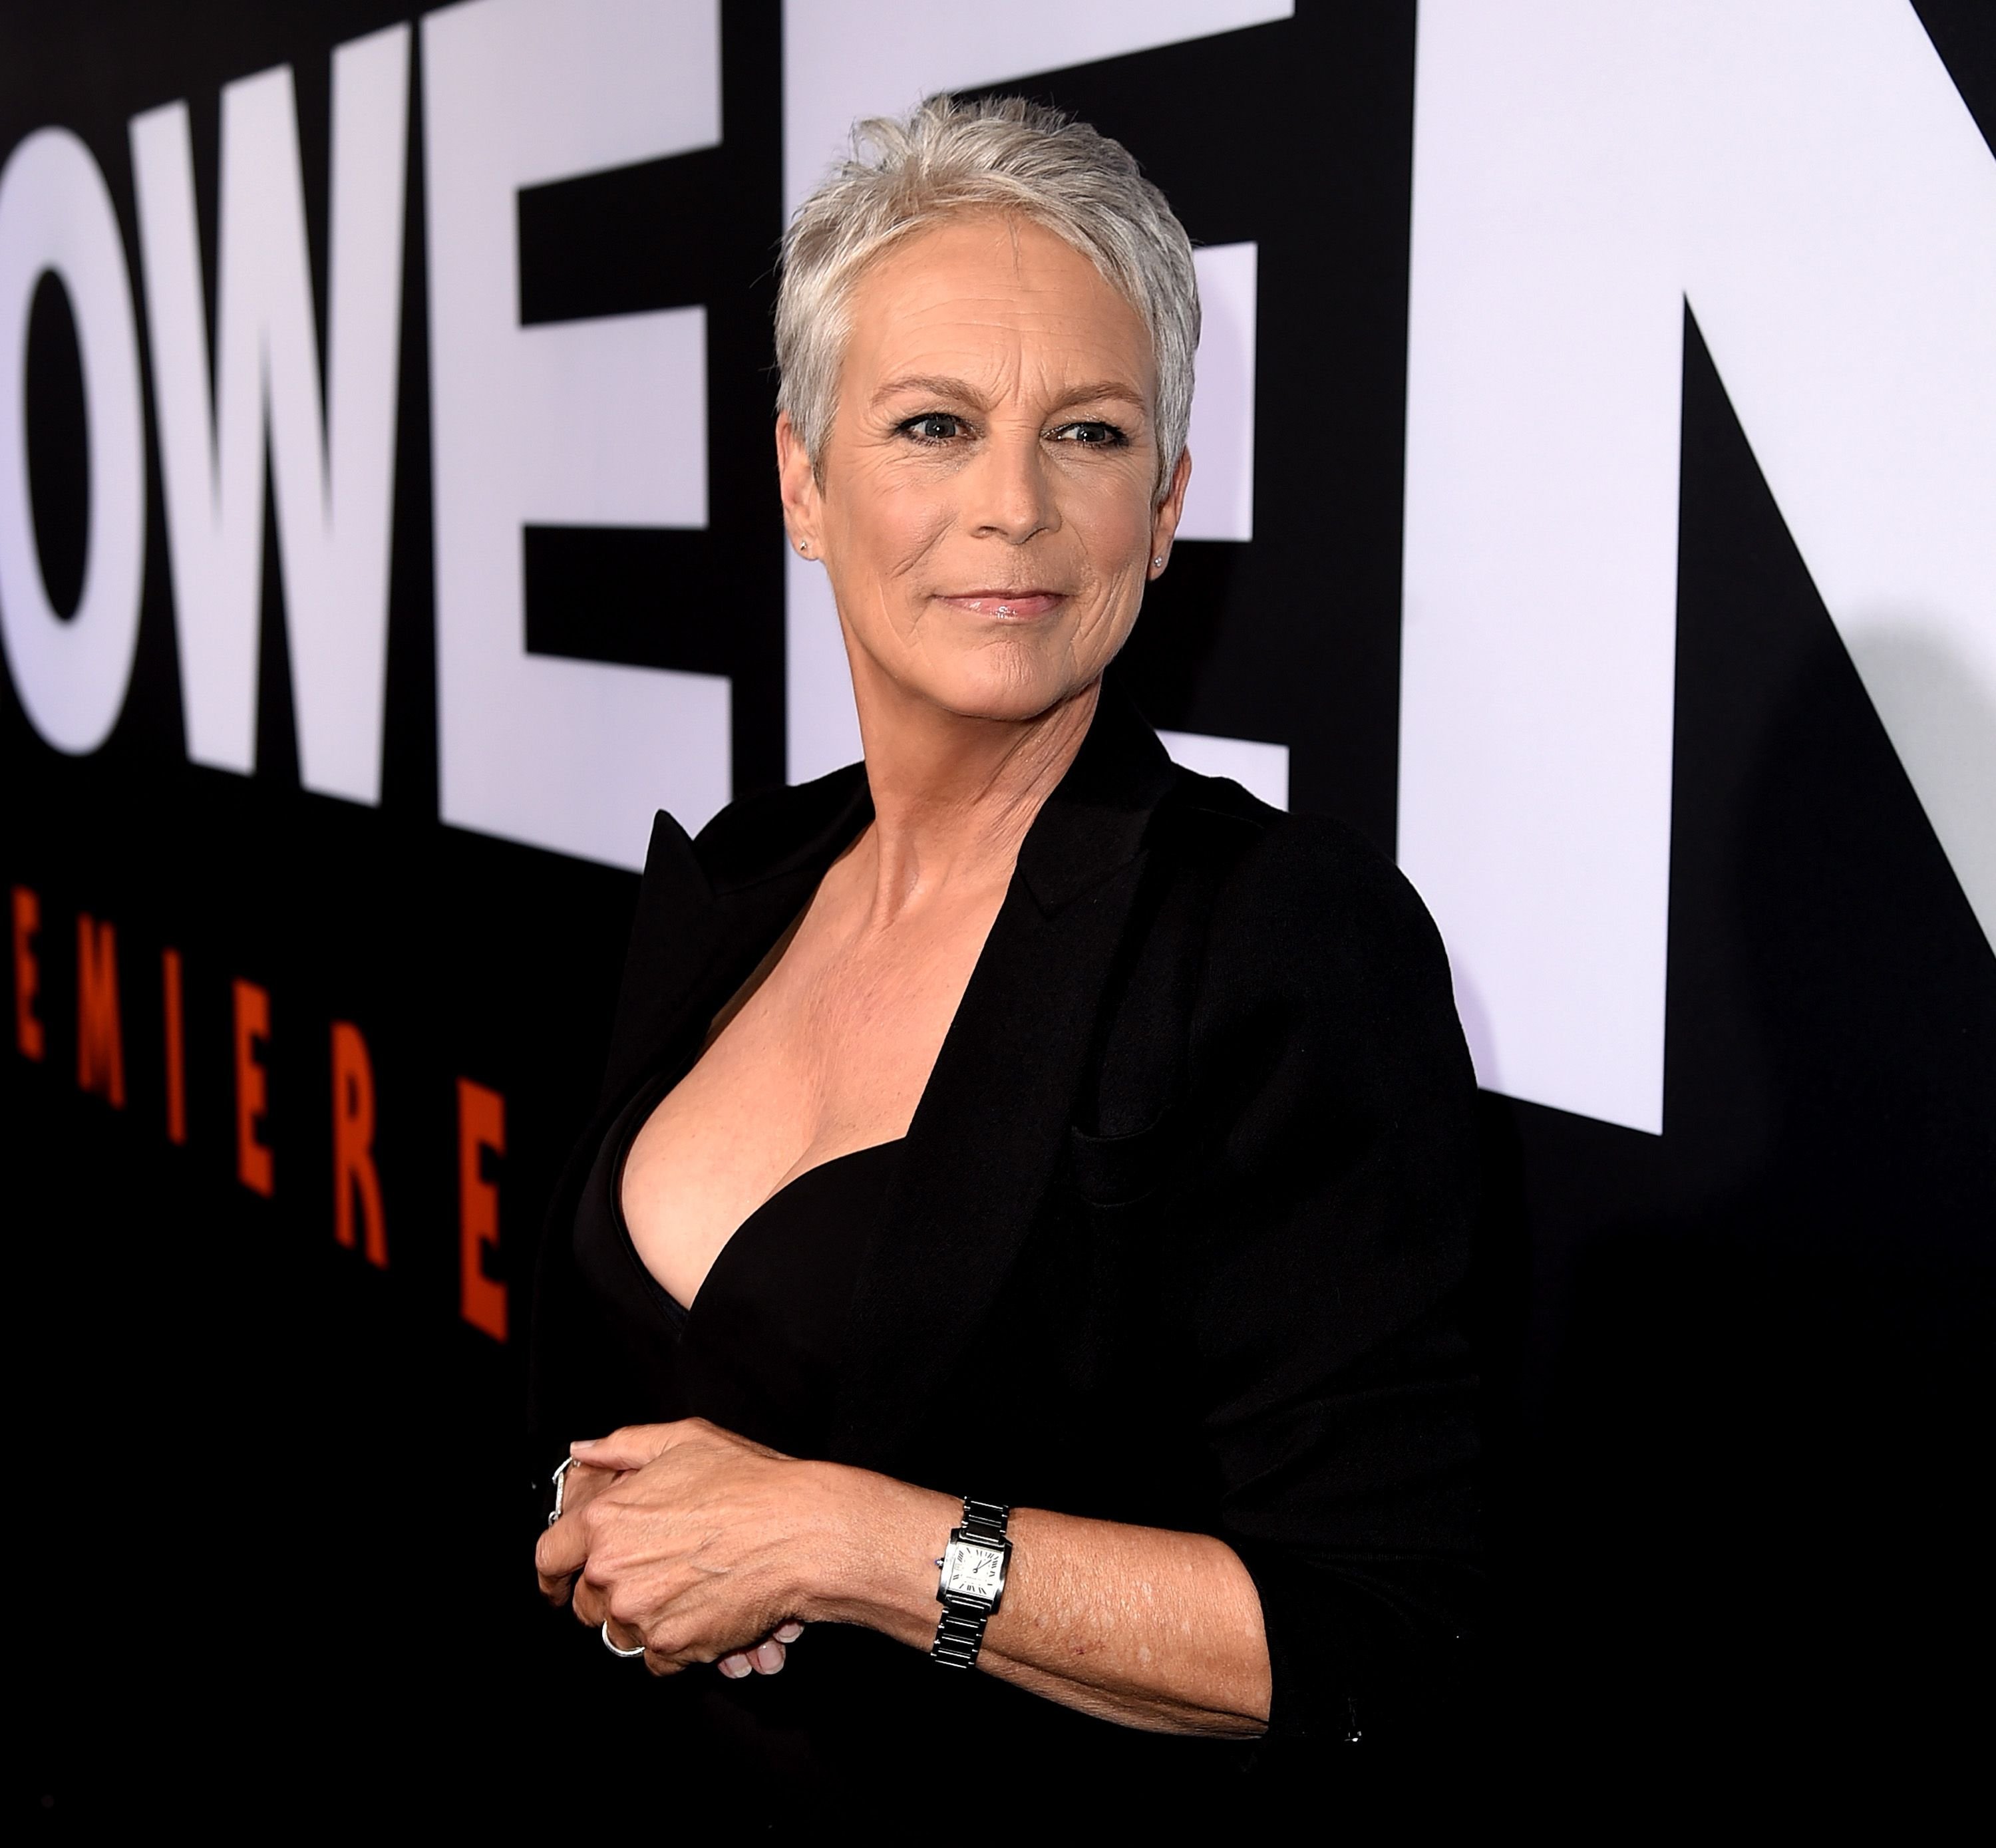 Jamie Lee Curtis at the premiere of Universal Pictures' "Halloween" at the TCL Chinese Theatre on October 17, 2018 | Photo: Getty Images